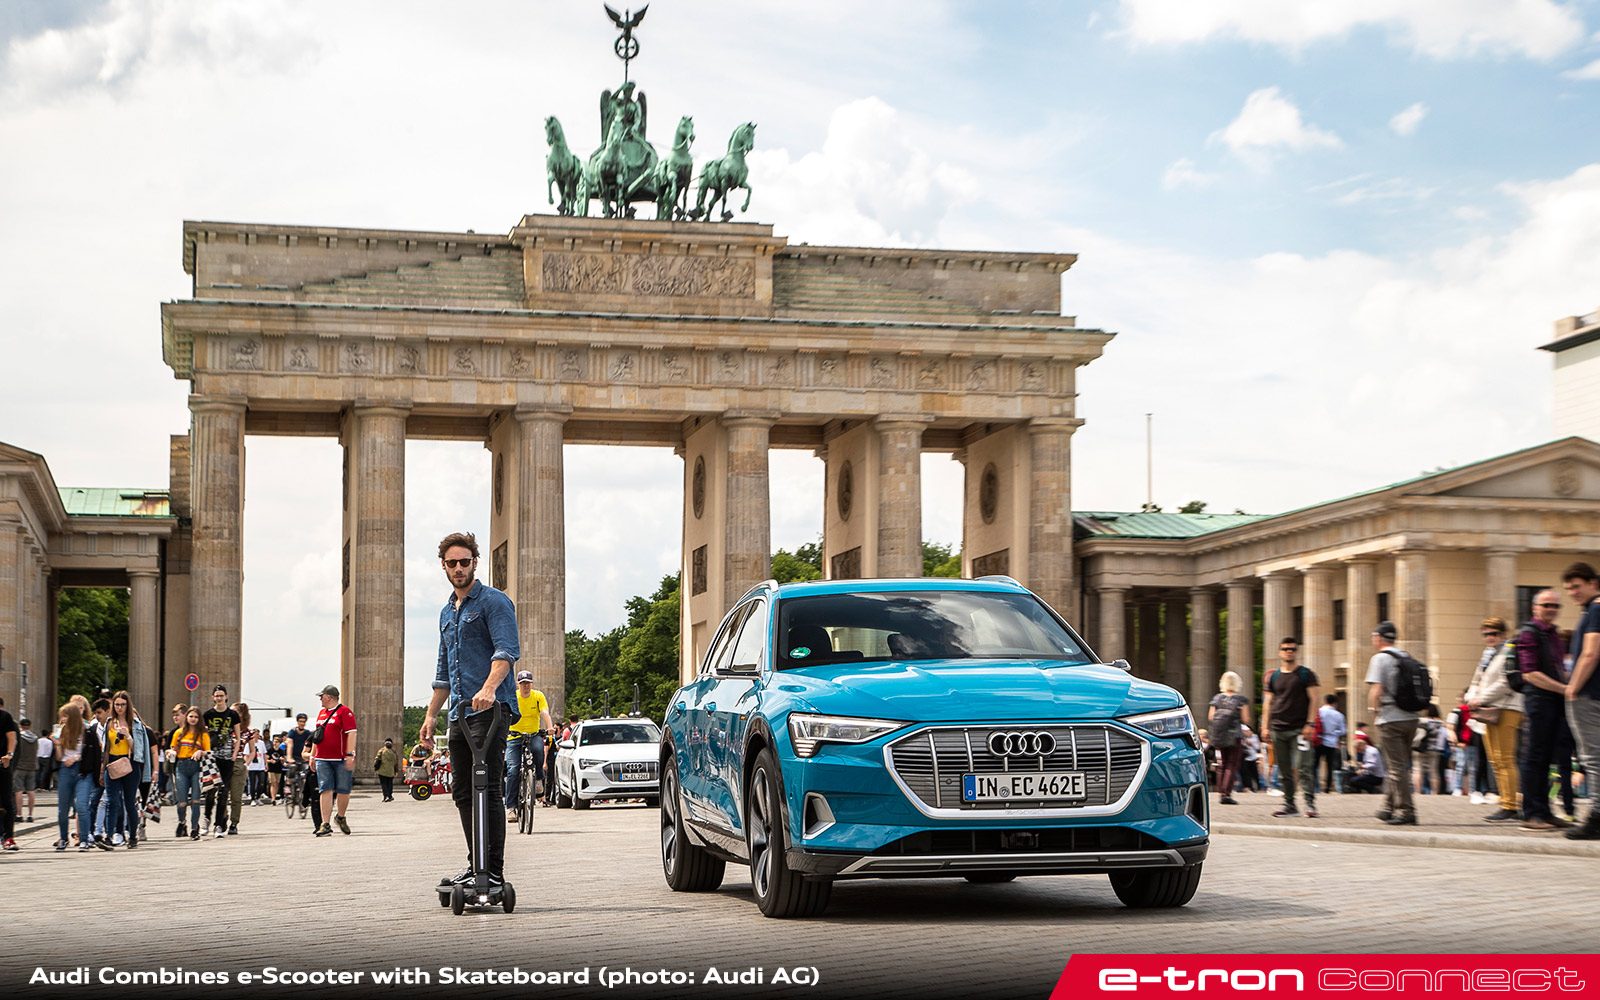 tæmme Afstemning Brandmand Audi Combines e-Scooter with Skateboard - e-tron connect